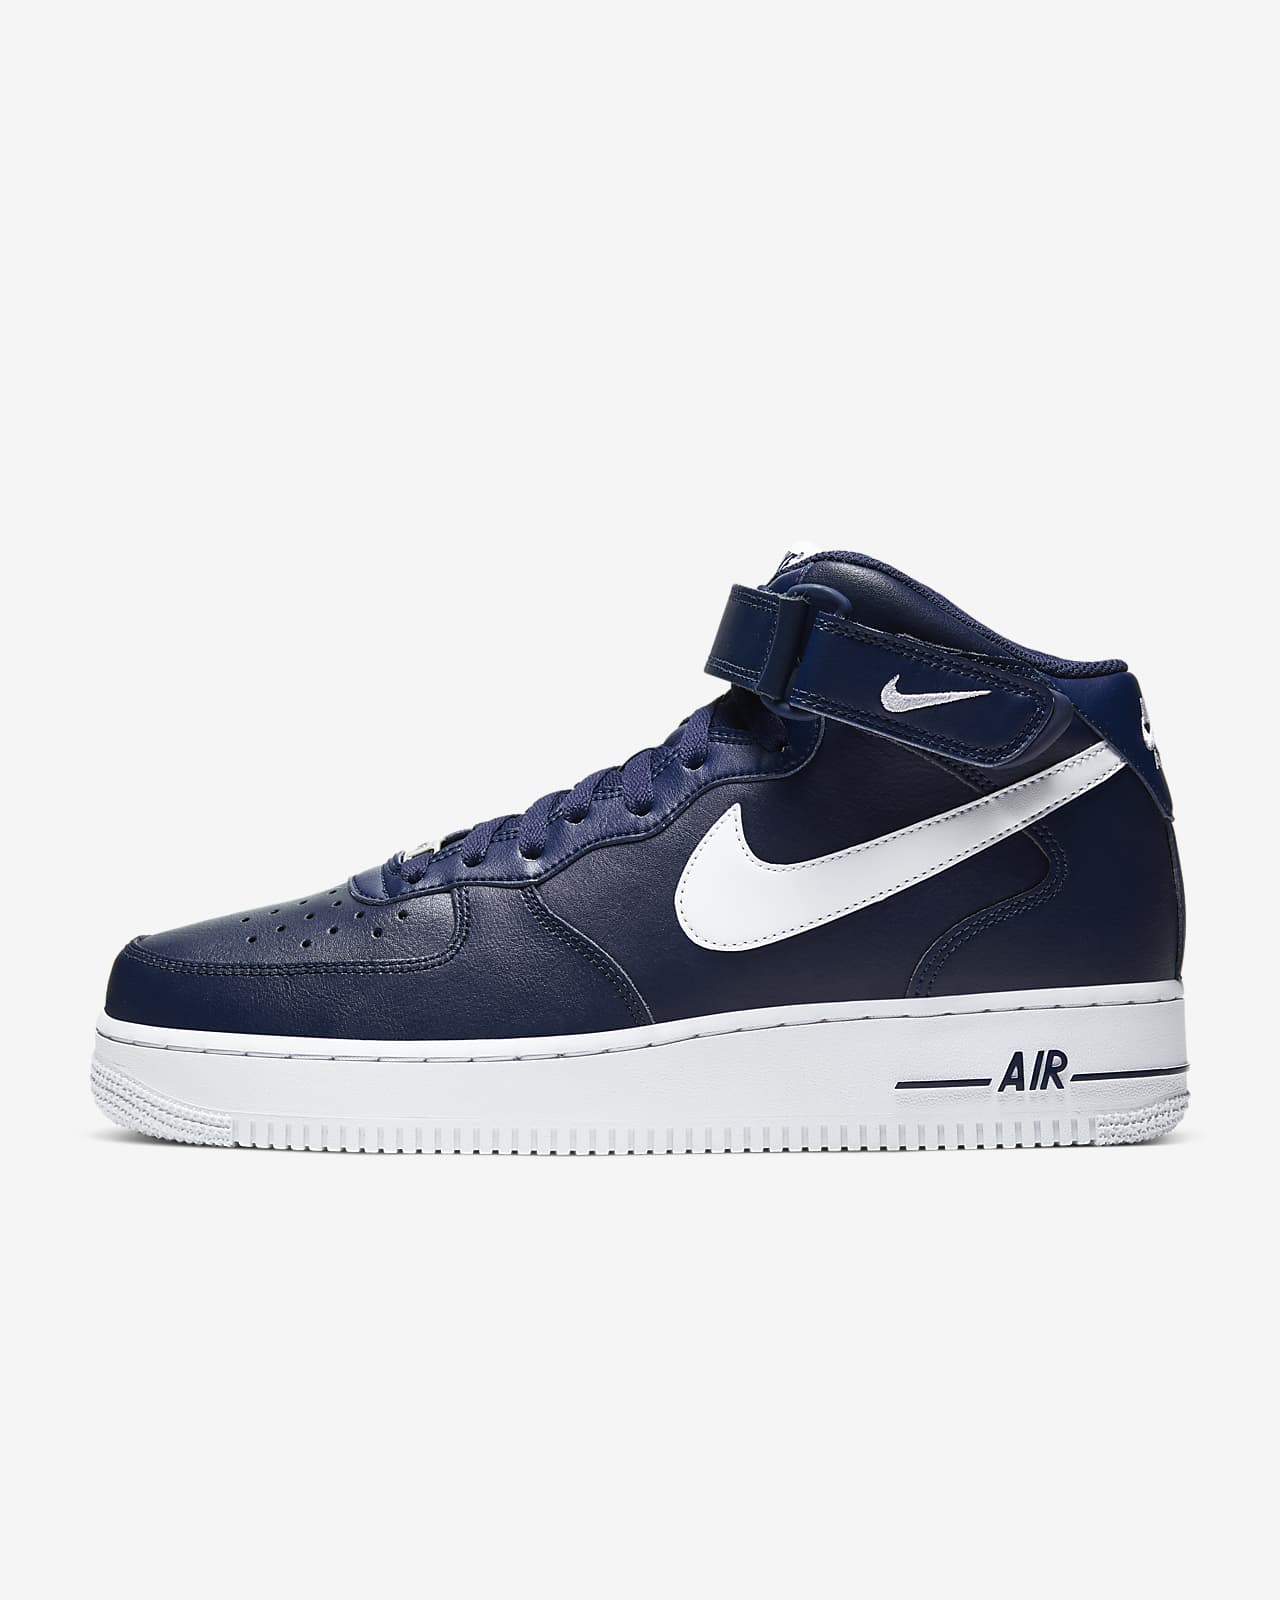 Chaussure Nike Air Force 1 Mid '07 pour 